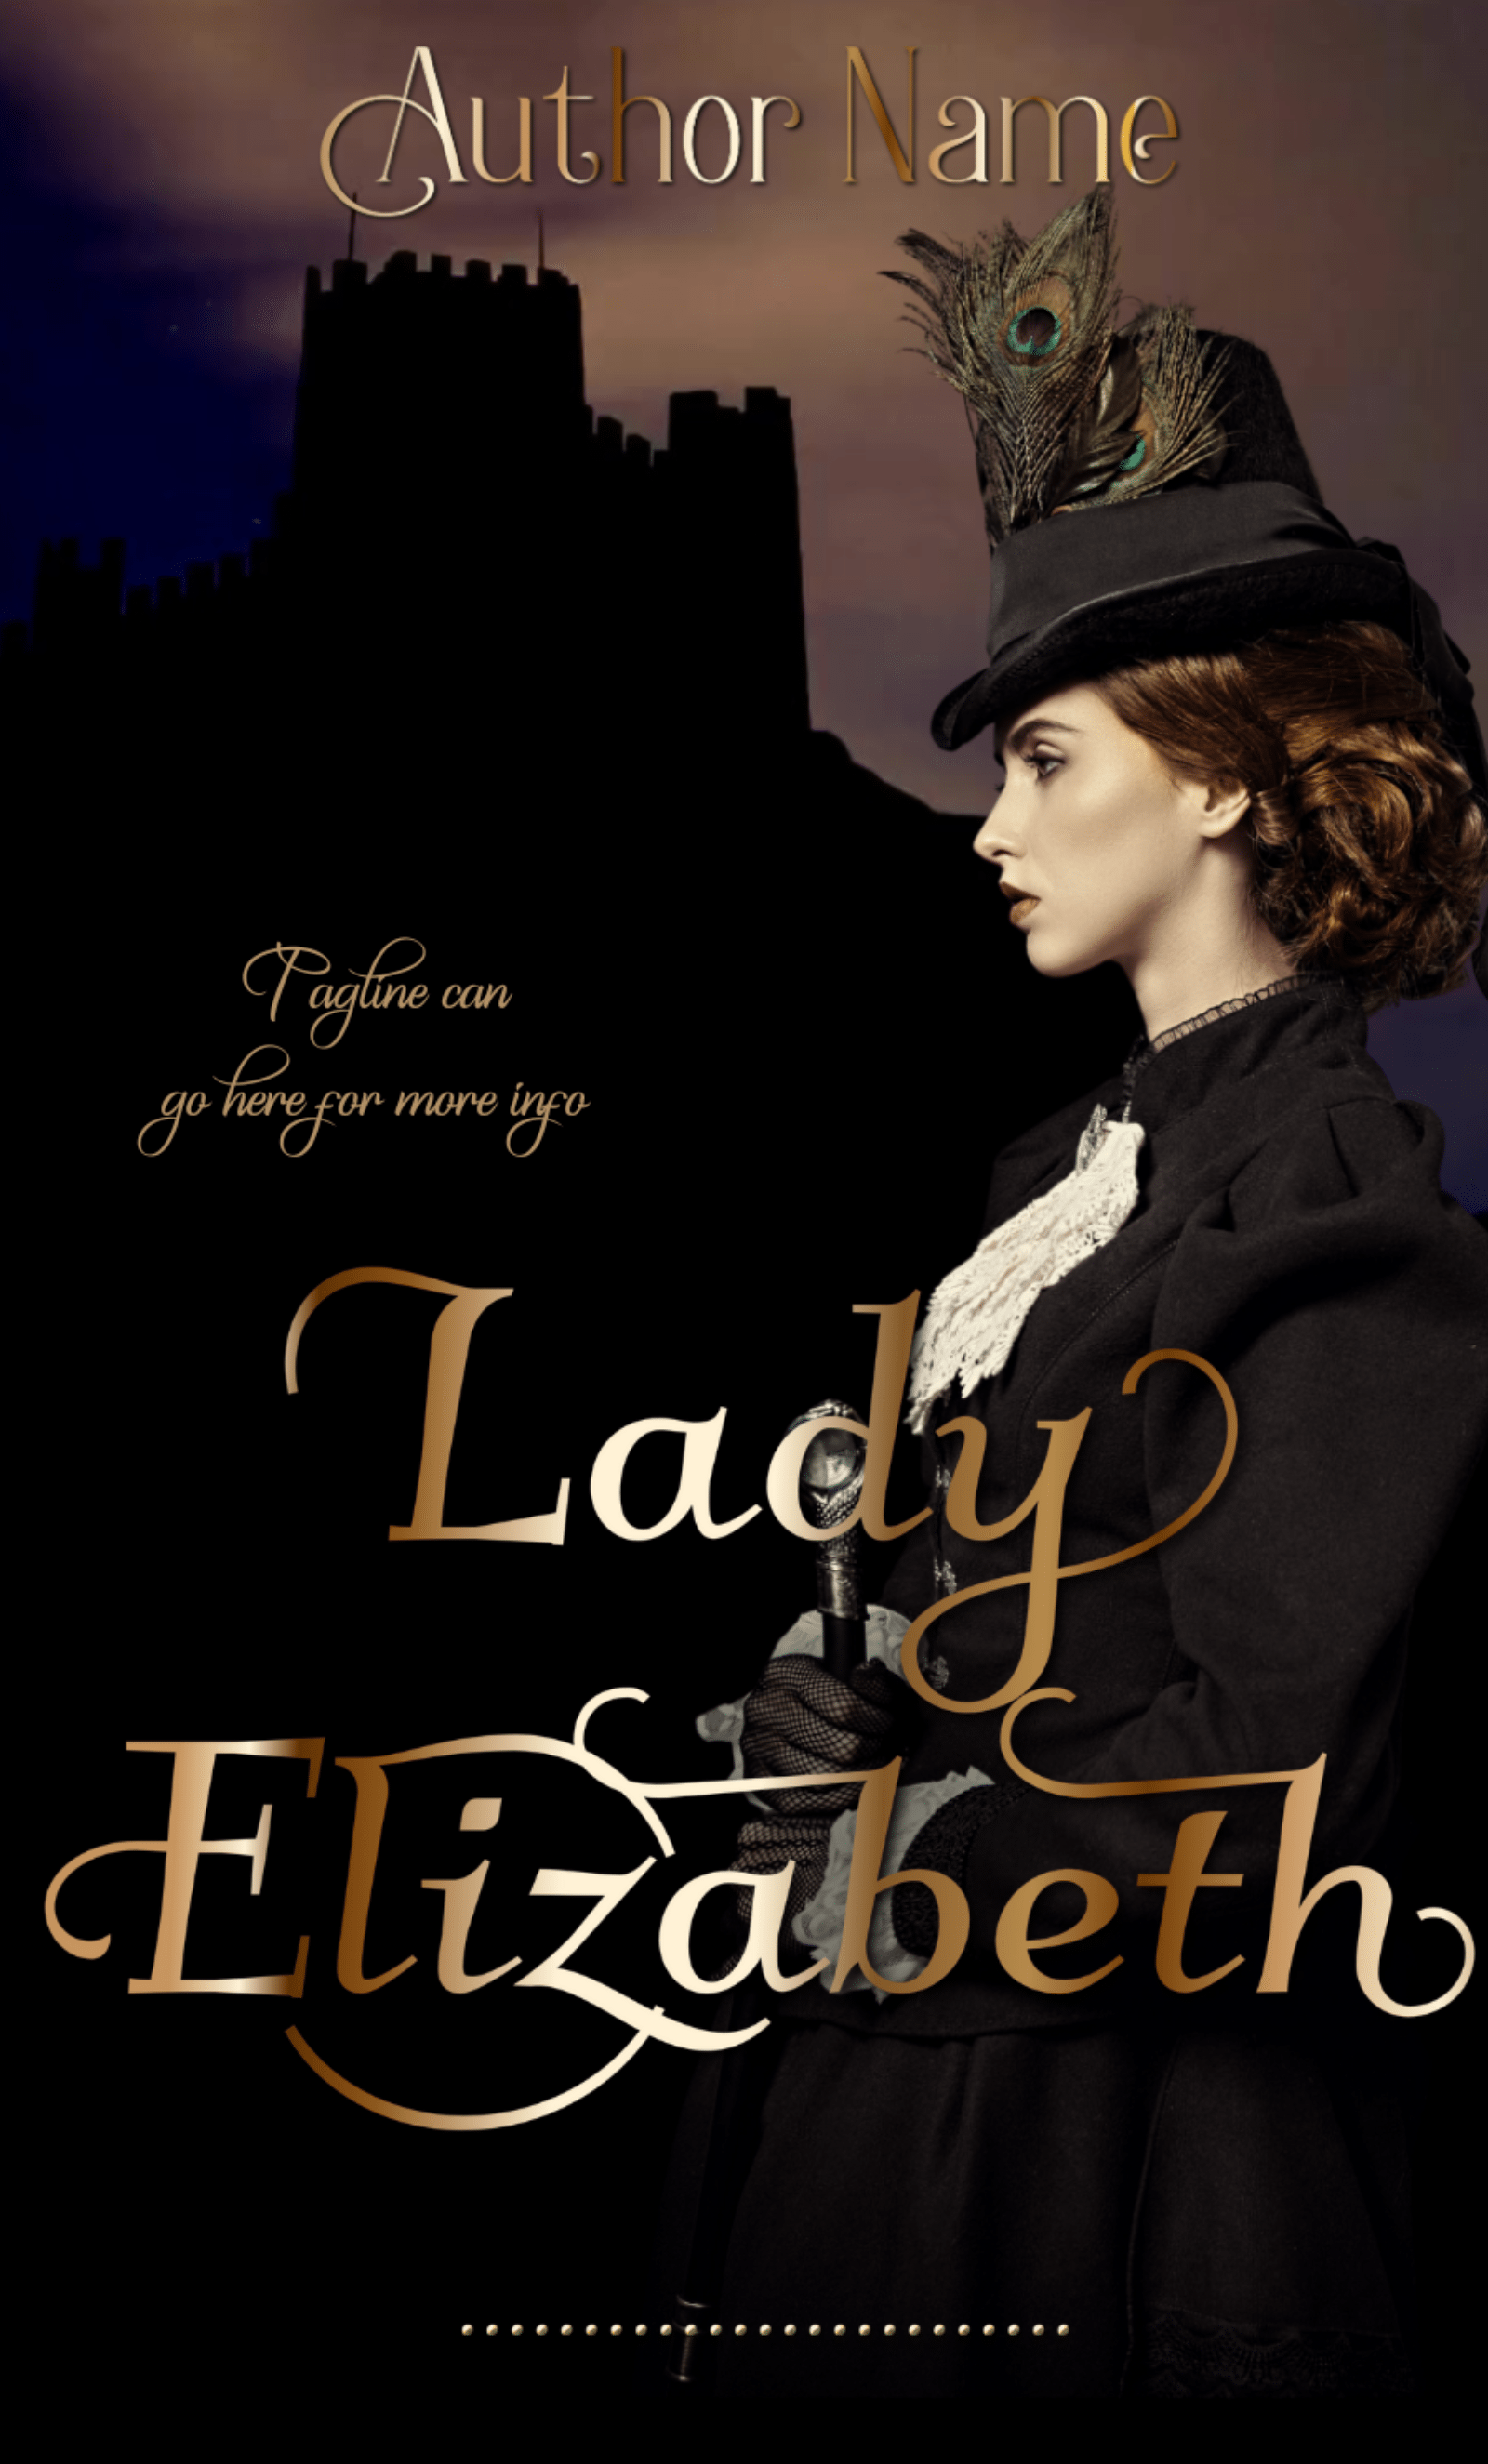 A book cover titled "Lady Elizabeth: Premade Book Cover" features a woman in Victorian-era clothing with a dark background. She wears a black dress, a hat with a feather, and gazes into the distance. A castle silhouette looms behind her. Placeholder text indicates "Author Name" and the tagline spot. BookSelf Book Cover Design & Premade Book Covers